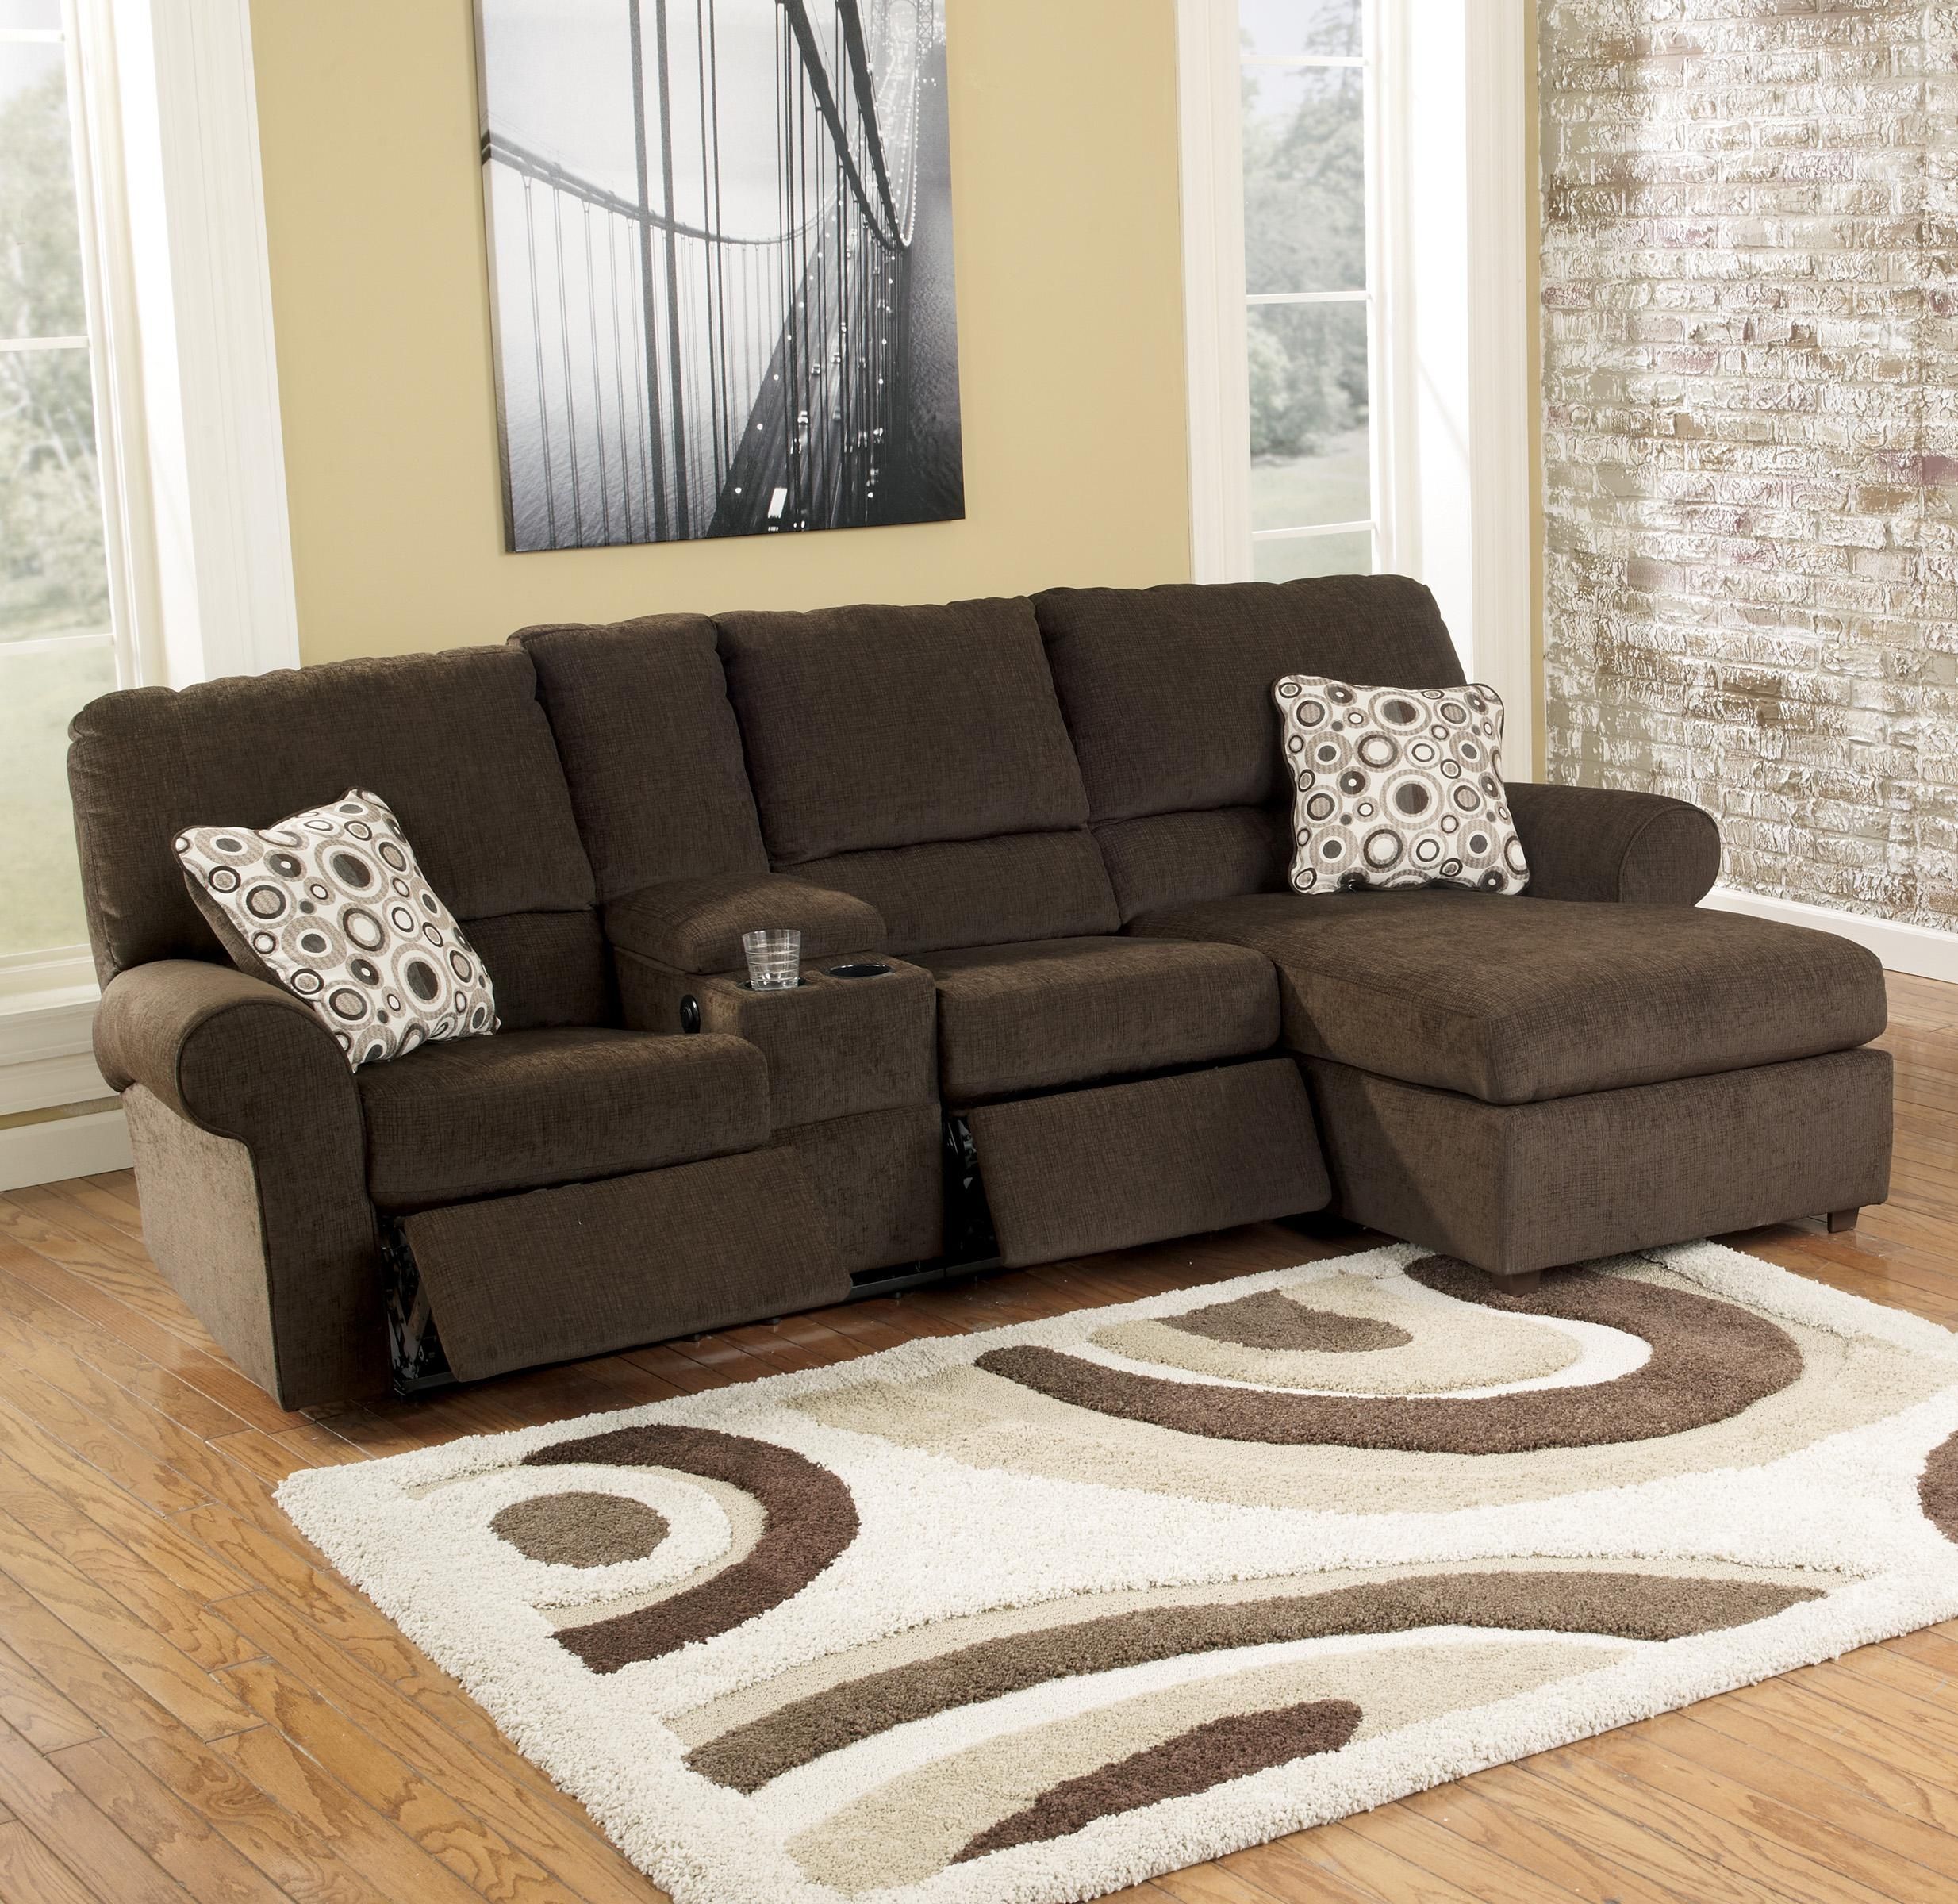 Glamorous Sectional Sofas With Recliners And Chaise 45 On Backless Intended For Backless Chaise Sofa (Photo 8 of 12)